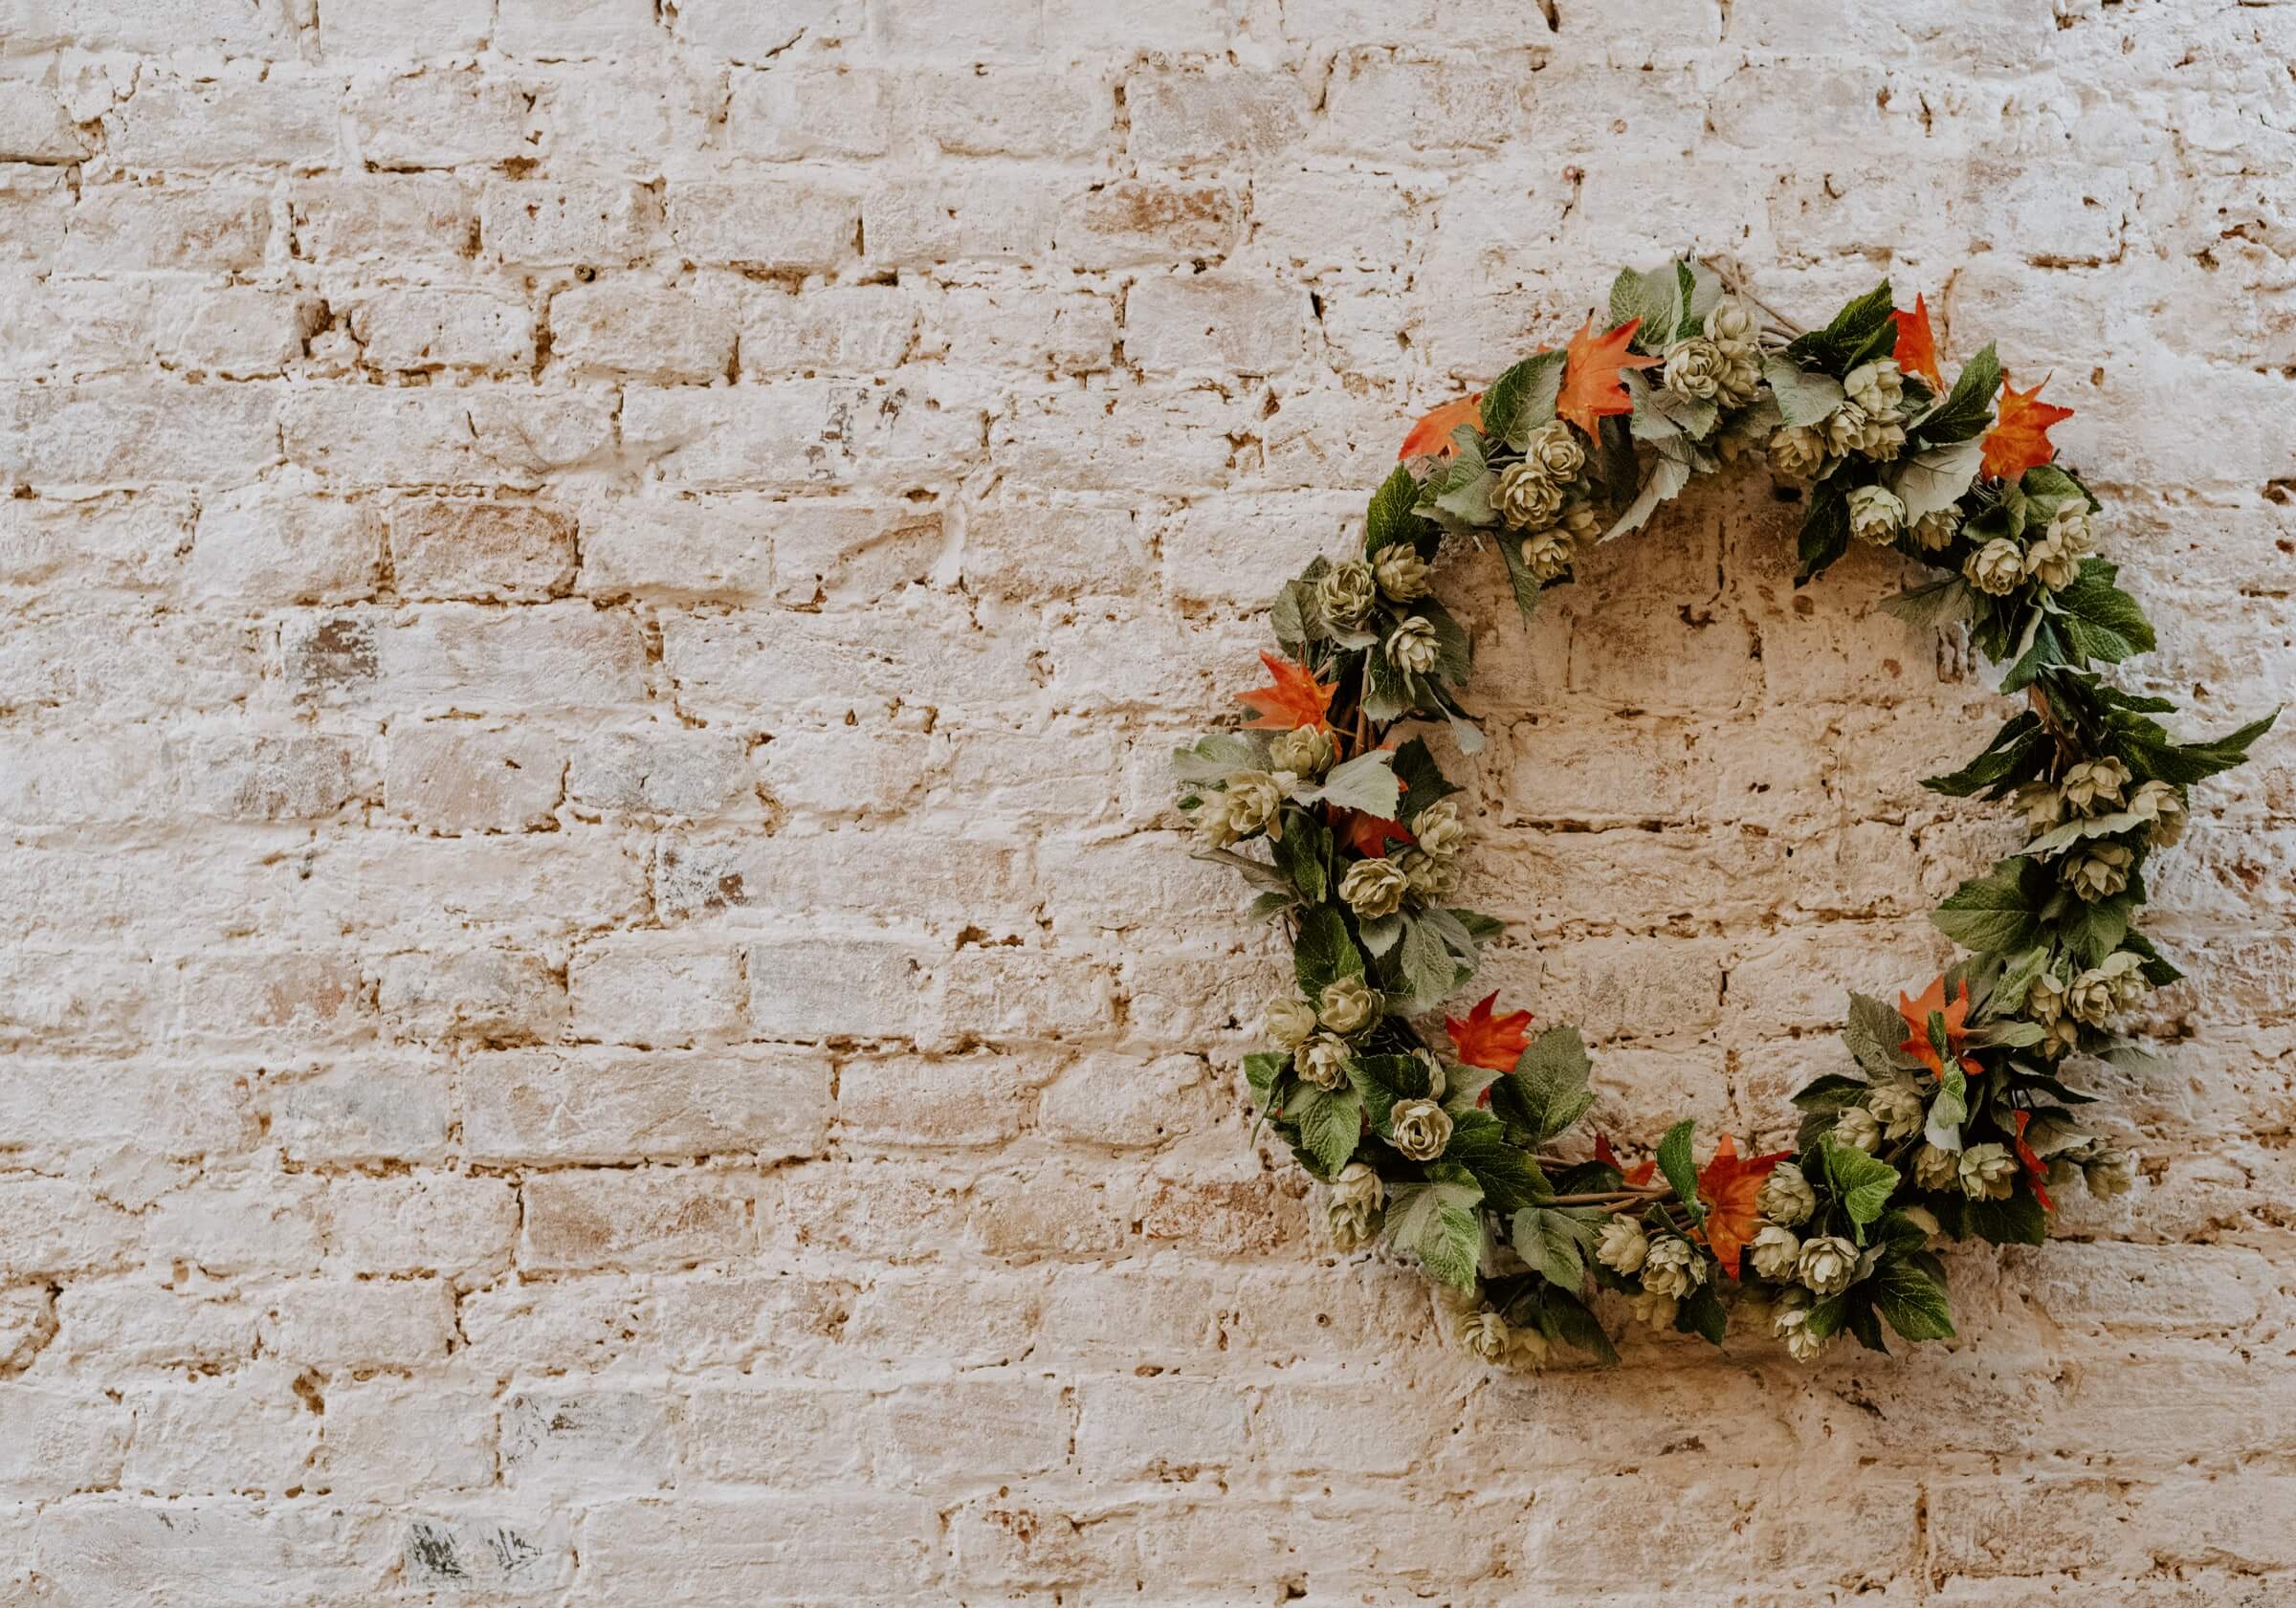 Things to Consider While Choosing a Funeral Wreath in Singapore